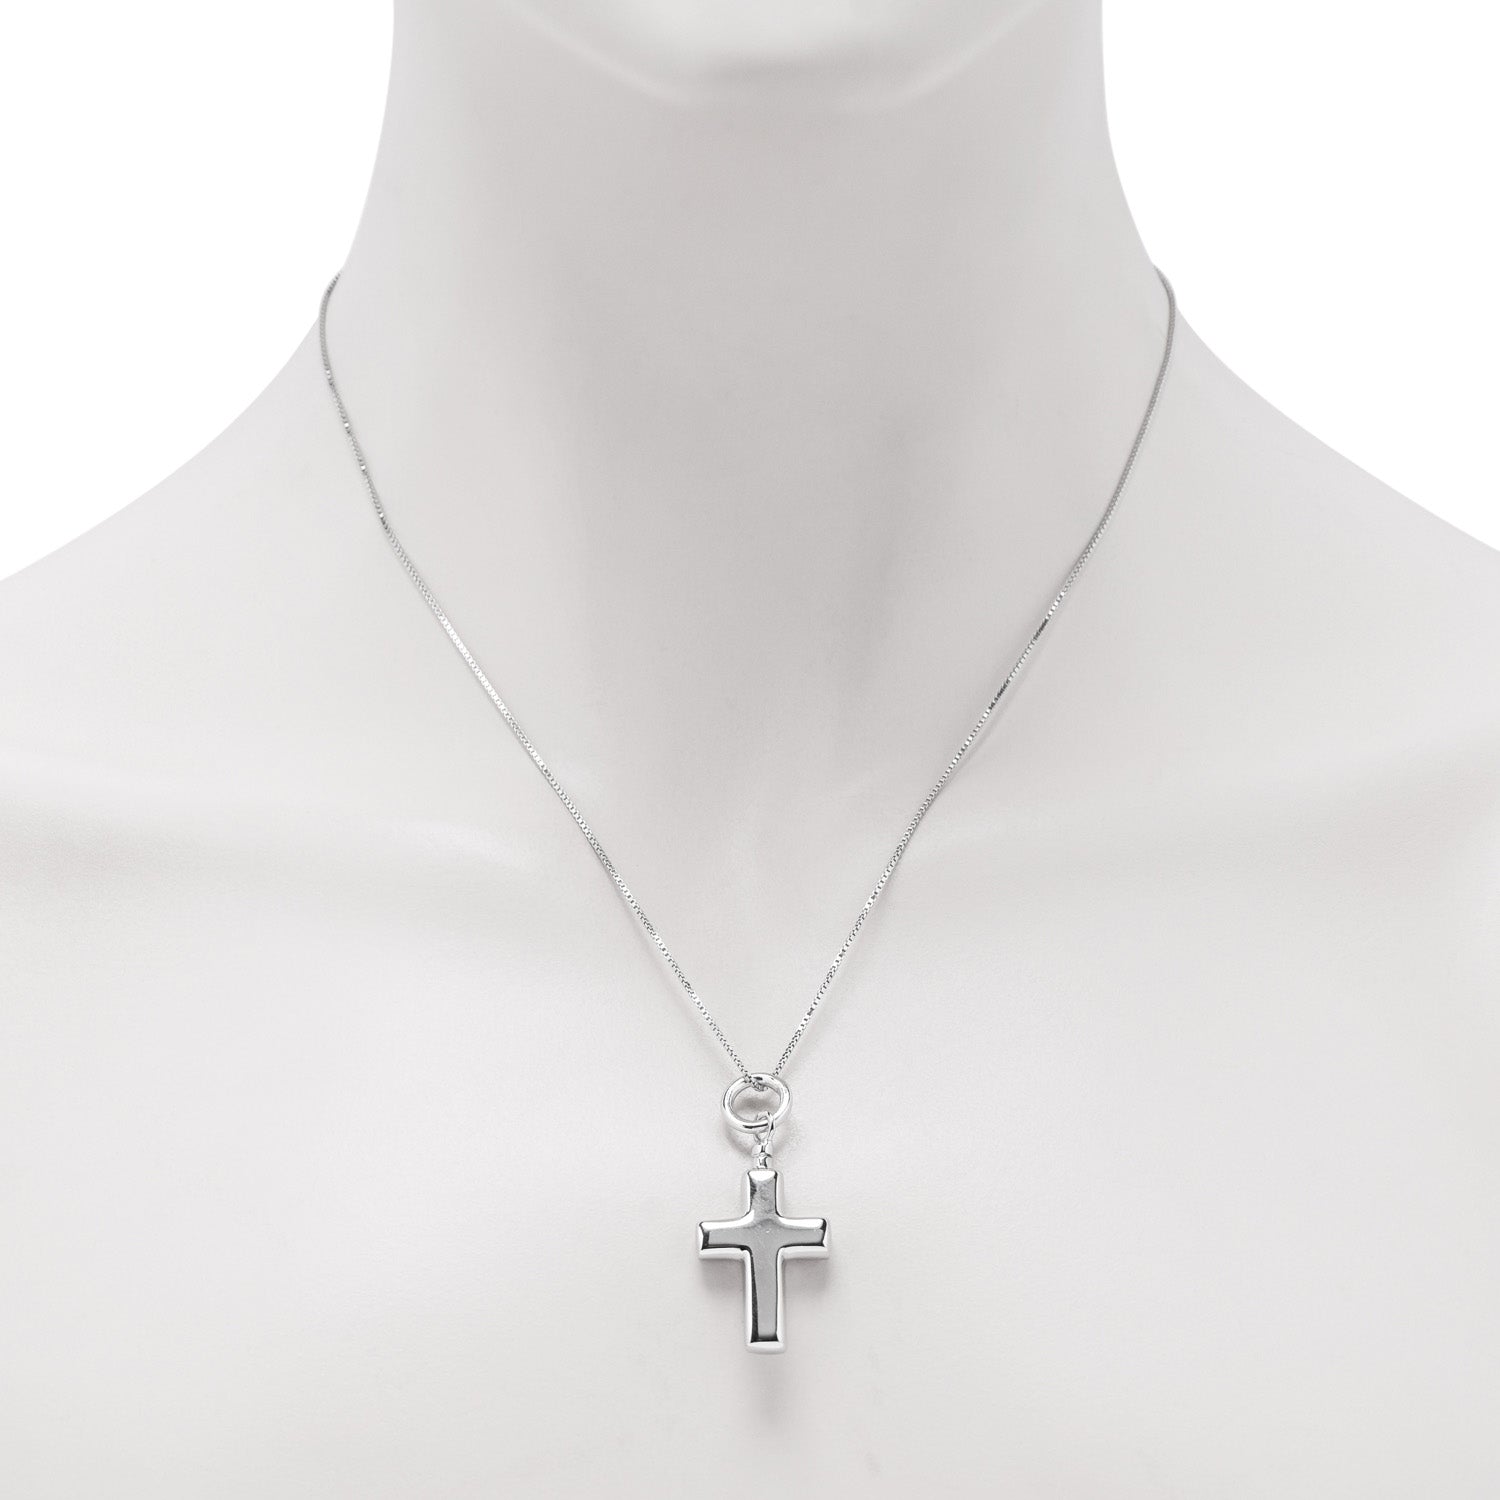 Primal Silver Sterling Silver Cross Ash Holder 18-inch Cable Chain Necklace  - Walmart.com